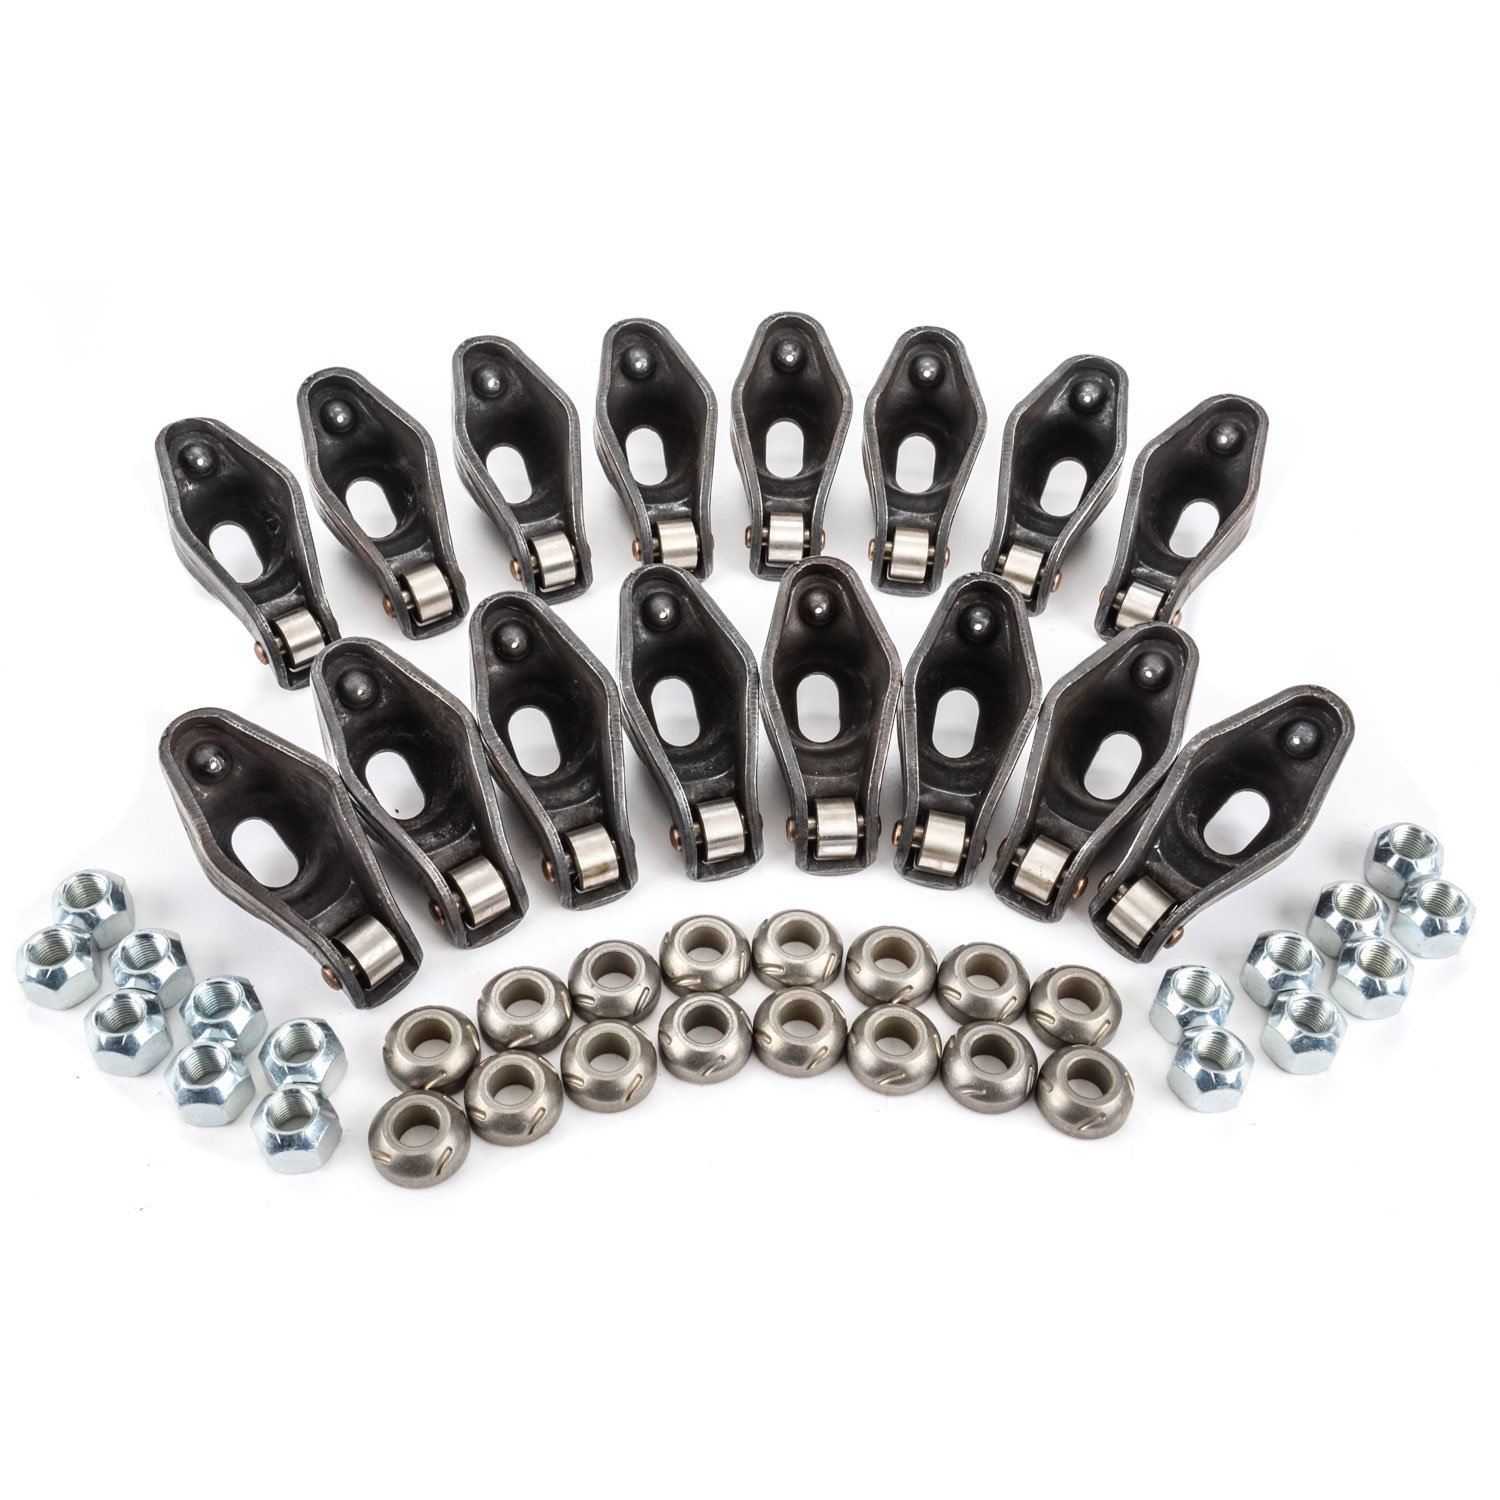 Small Block Chevy Roller-Tip Rocker Arms with 1.5 Ratio & 3/8" Stud